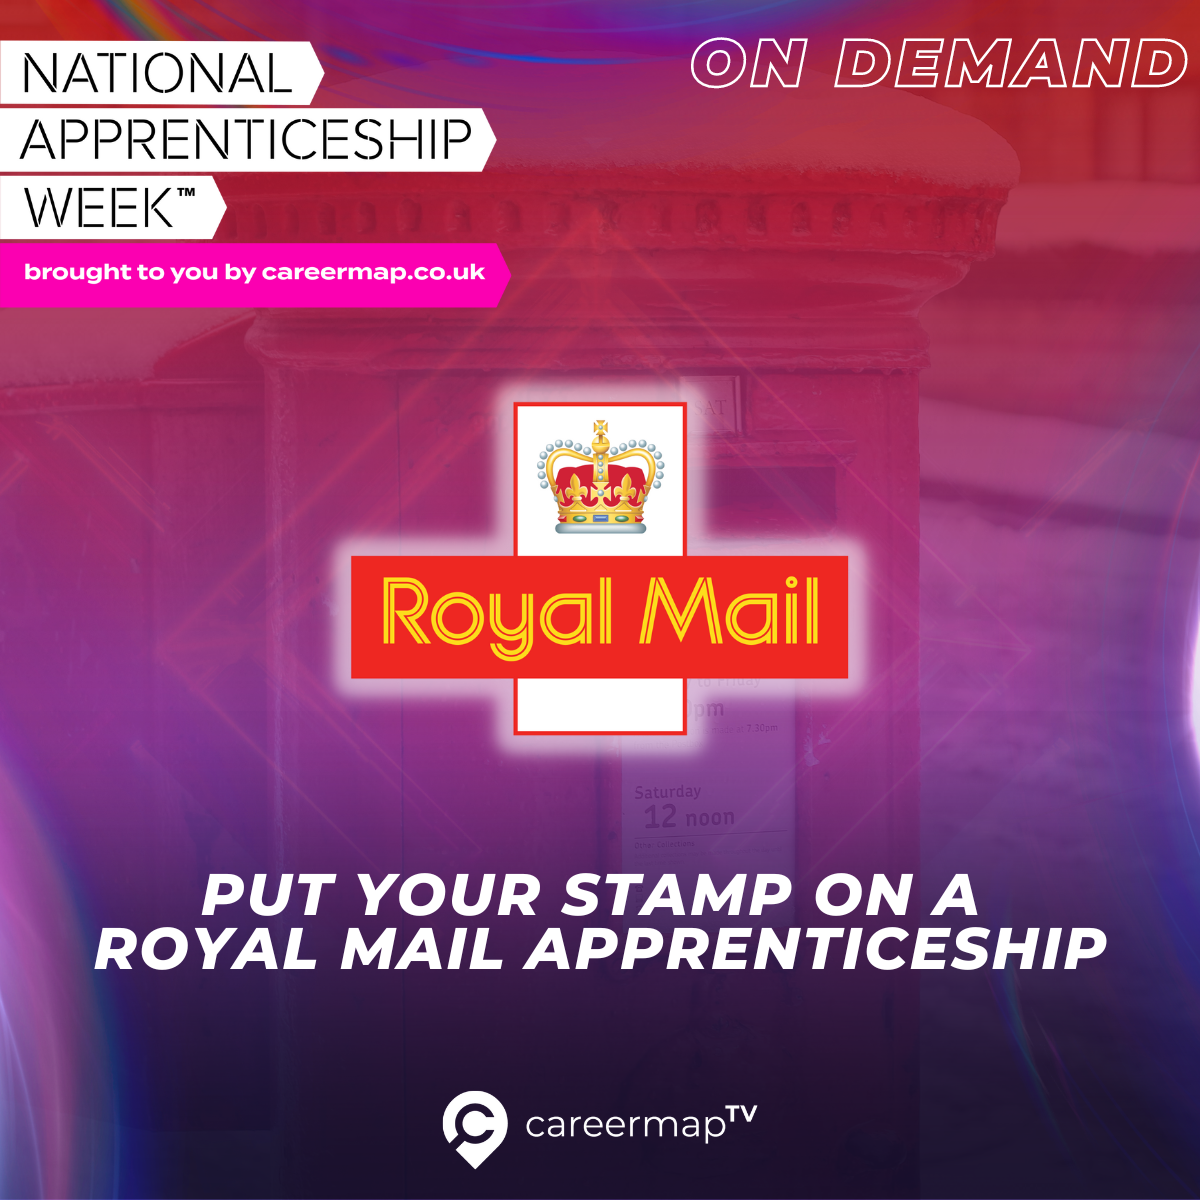 Royal Mail event image